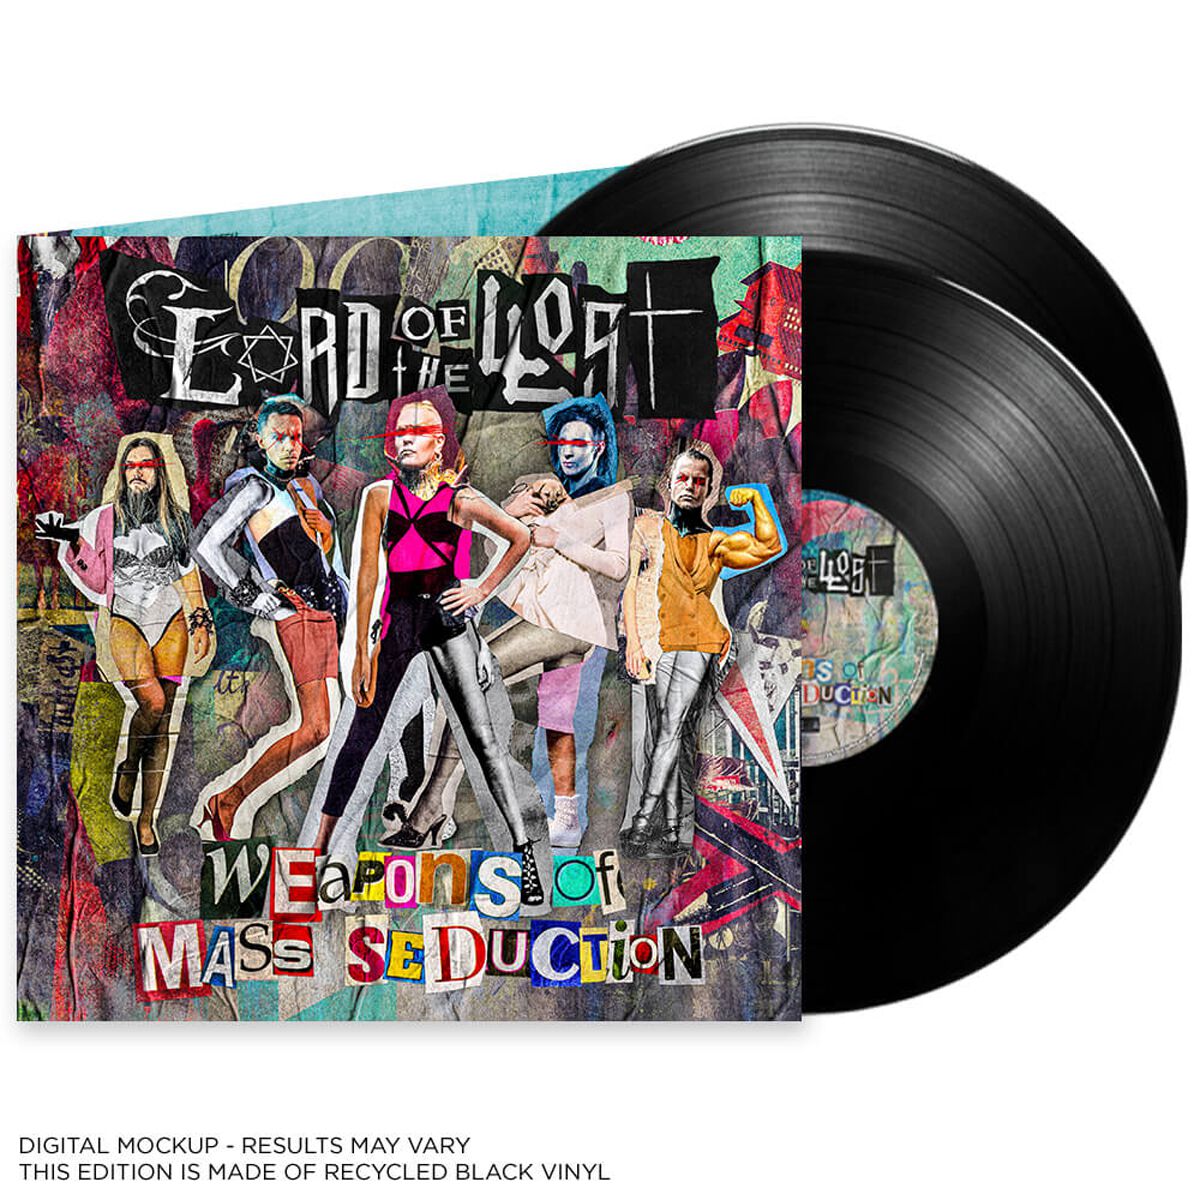 Weapons of mass seduction von Lord Of The Lost - 2-LP (Gatefold)